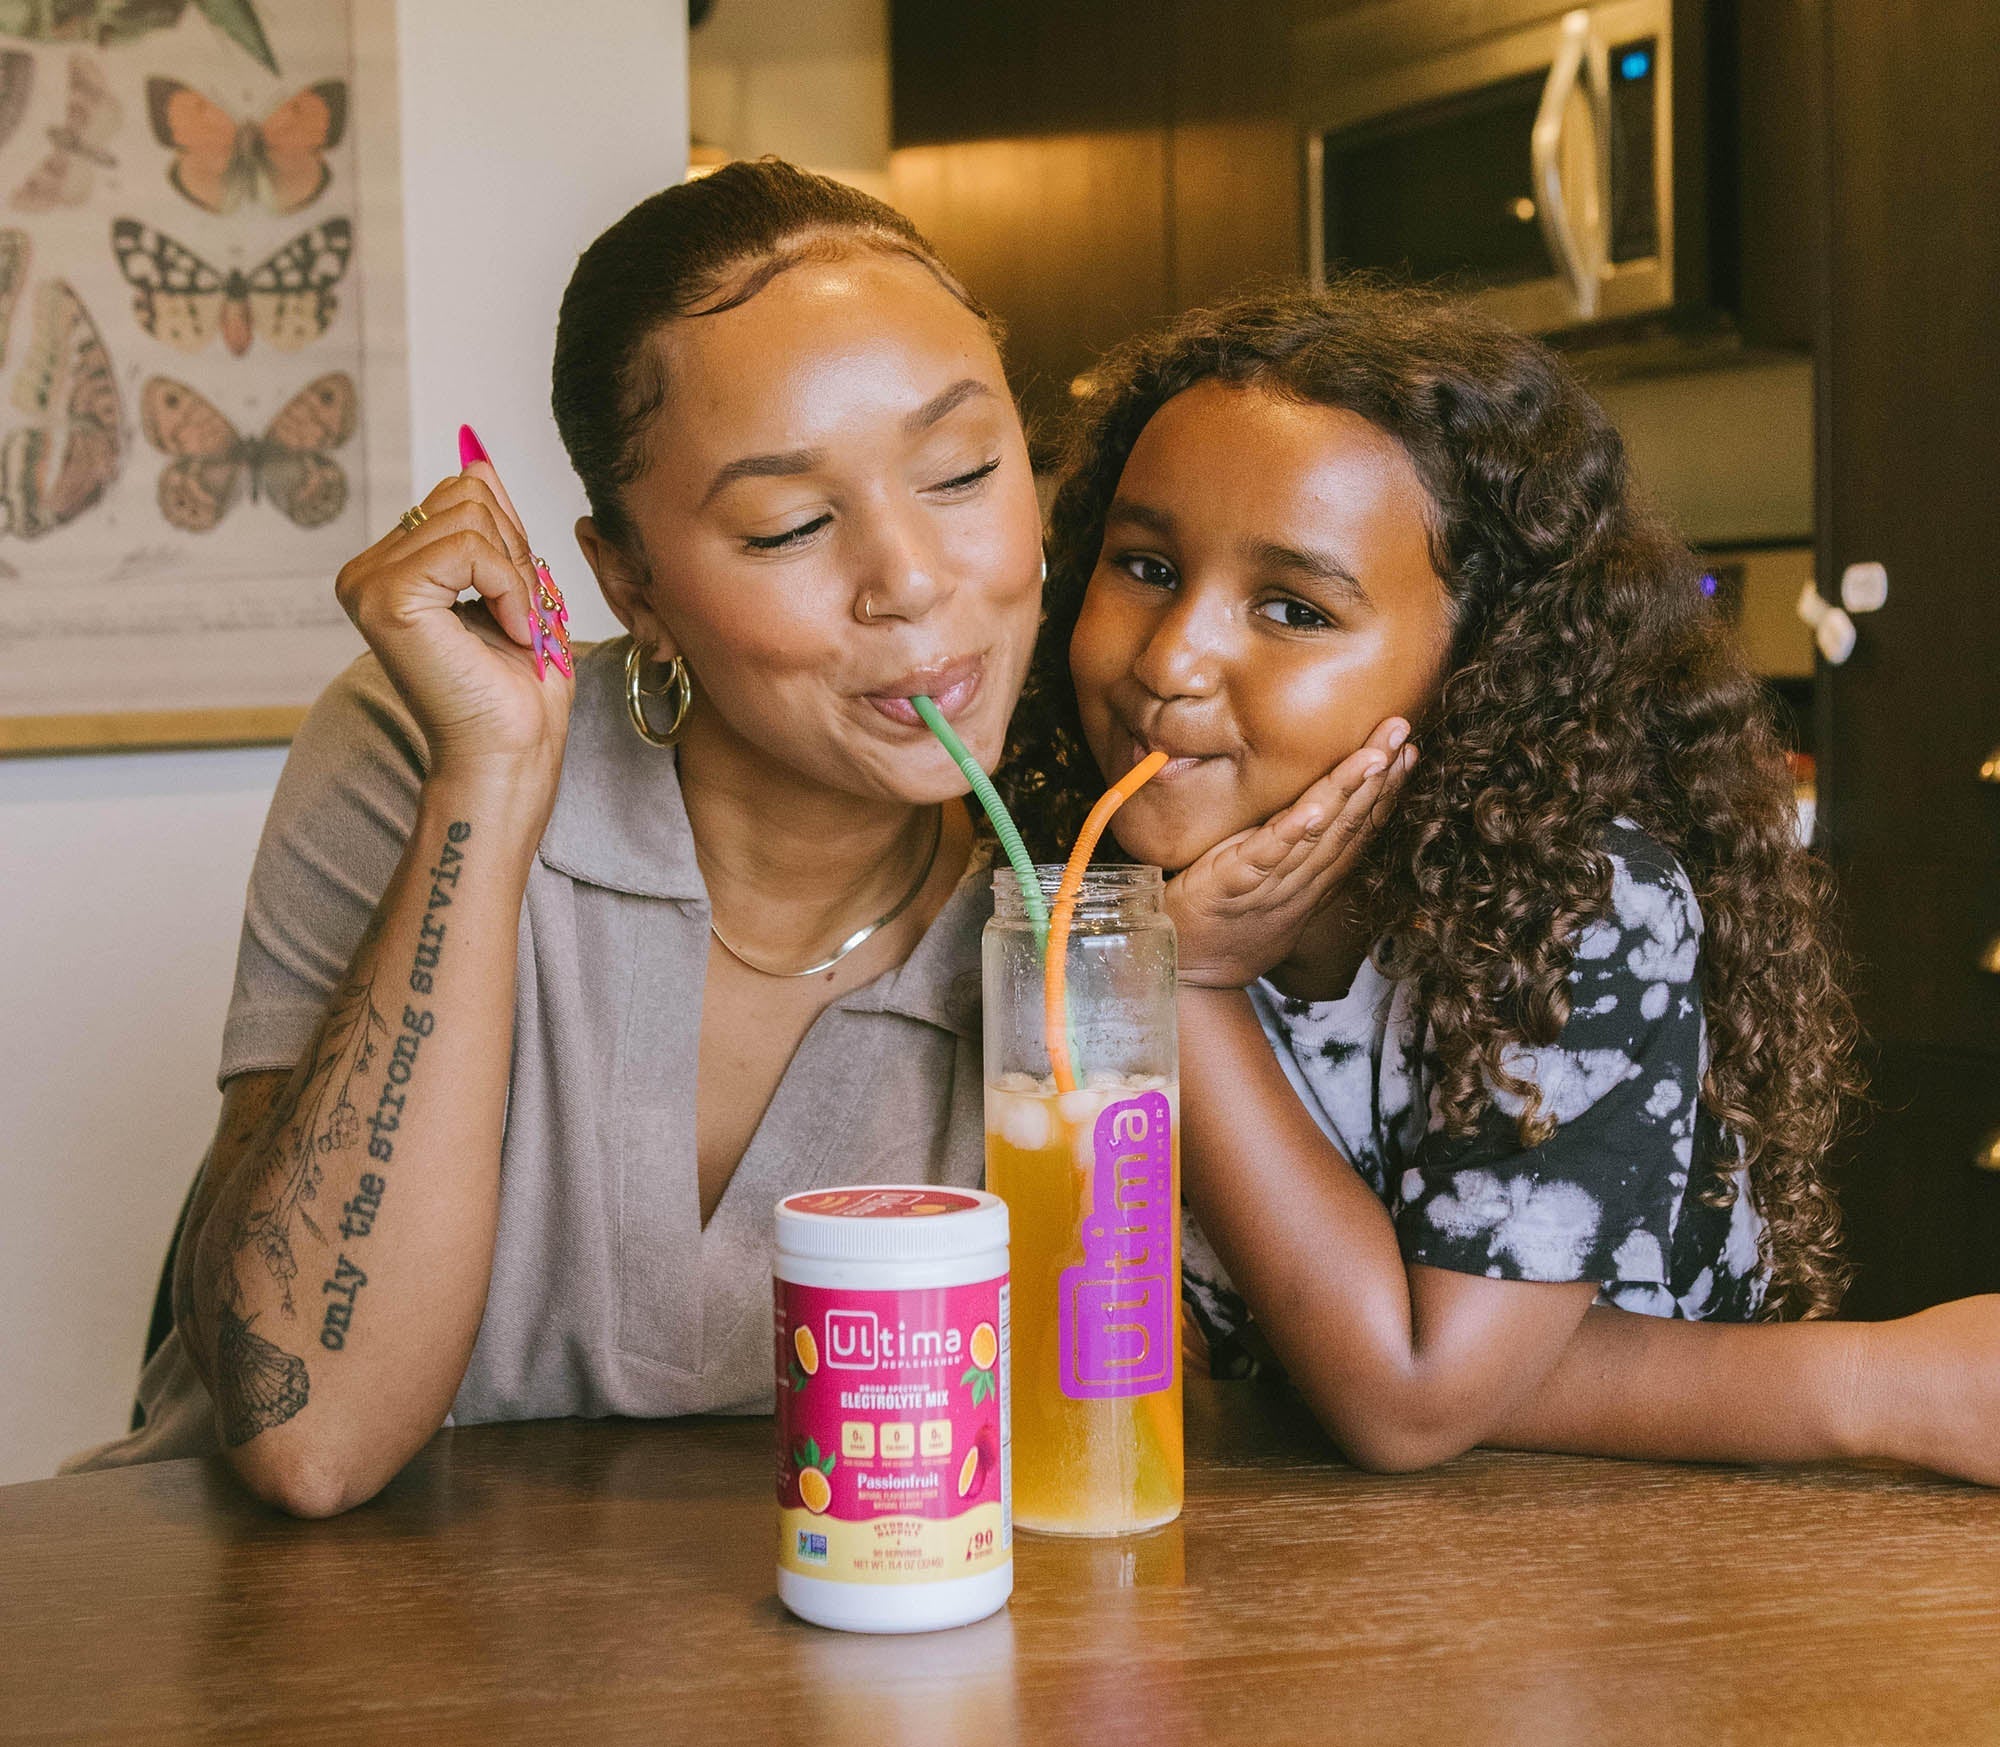 Mother and daughter share a delicious and replenishing drink of Ultima, sugar-free free electrolyte powder